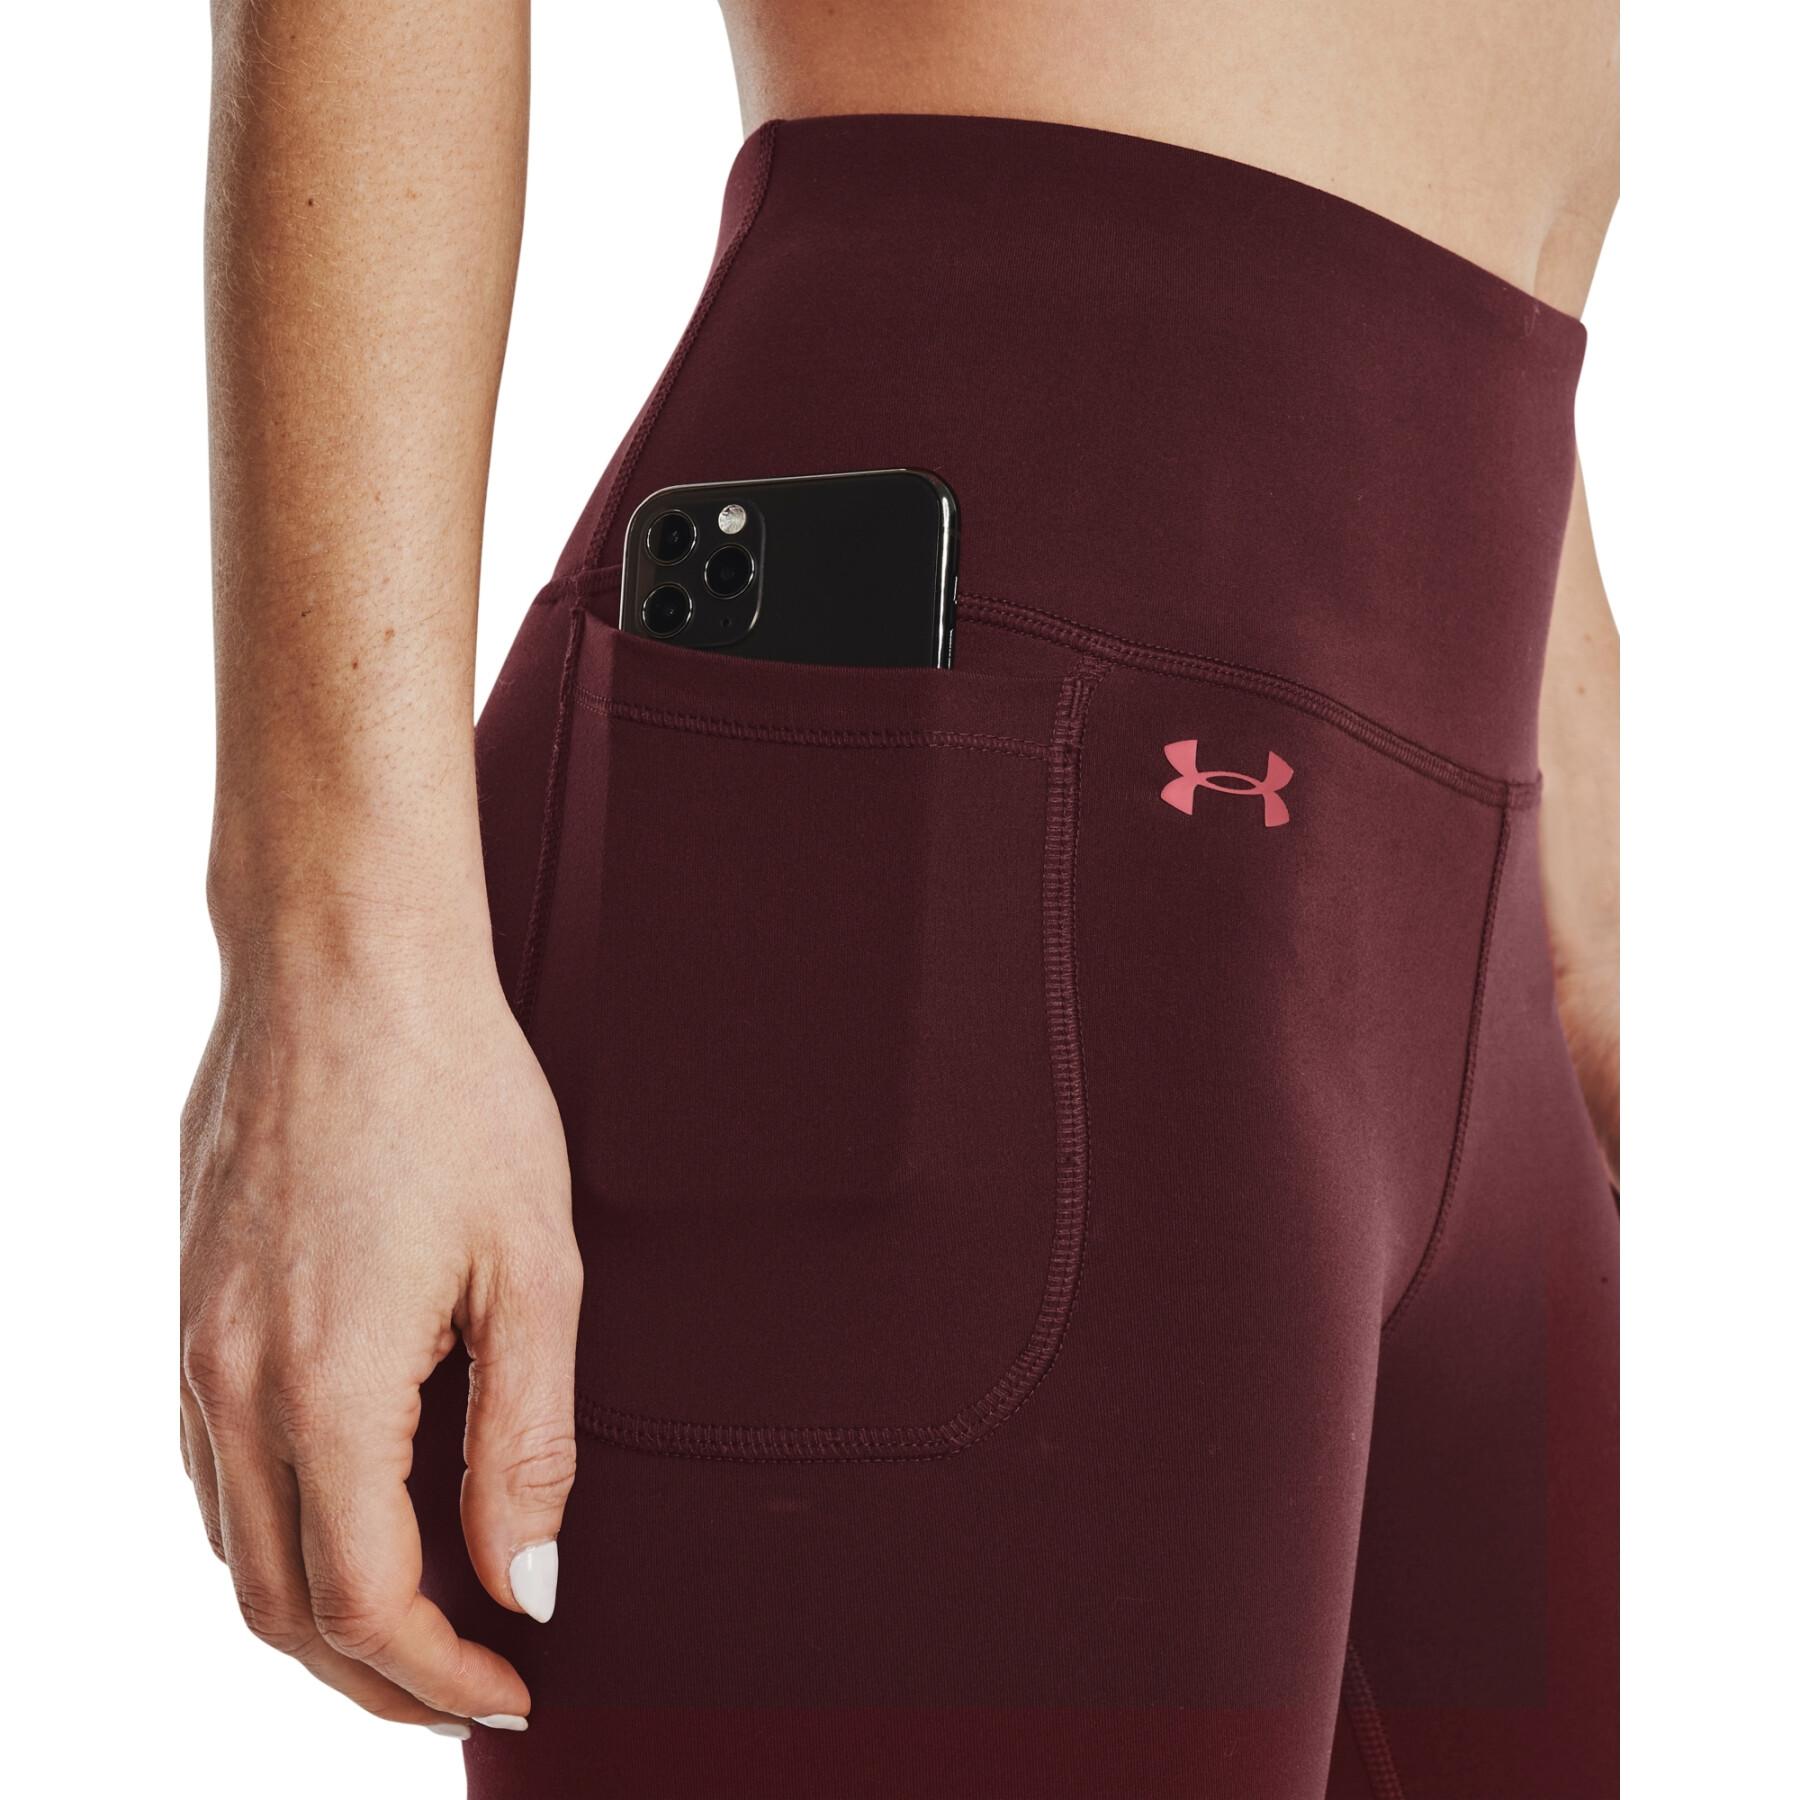 Legging mujer Under Armour Motion